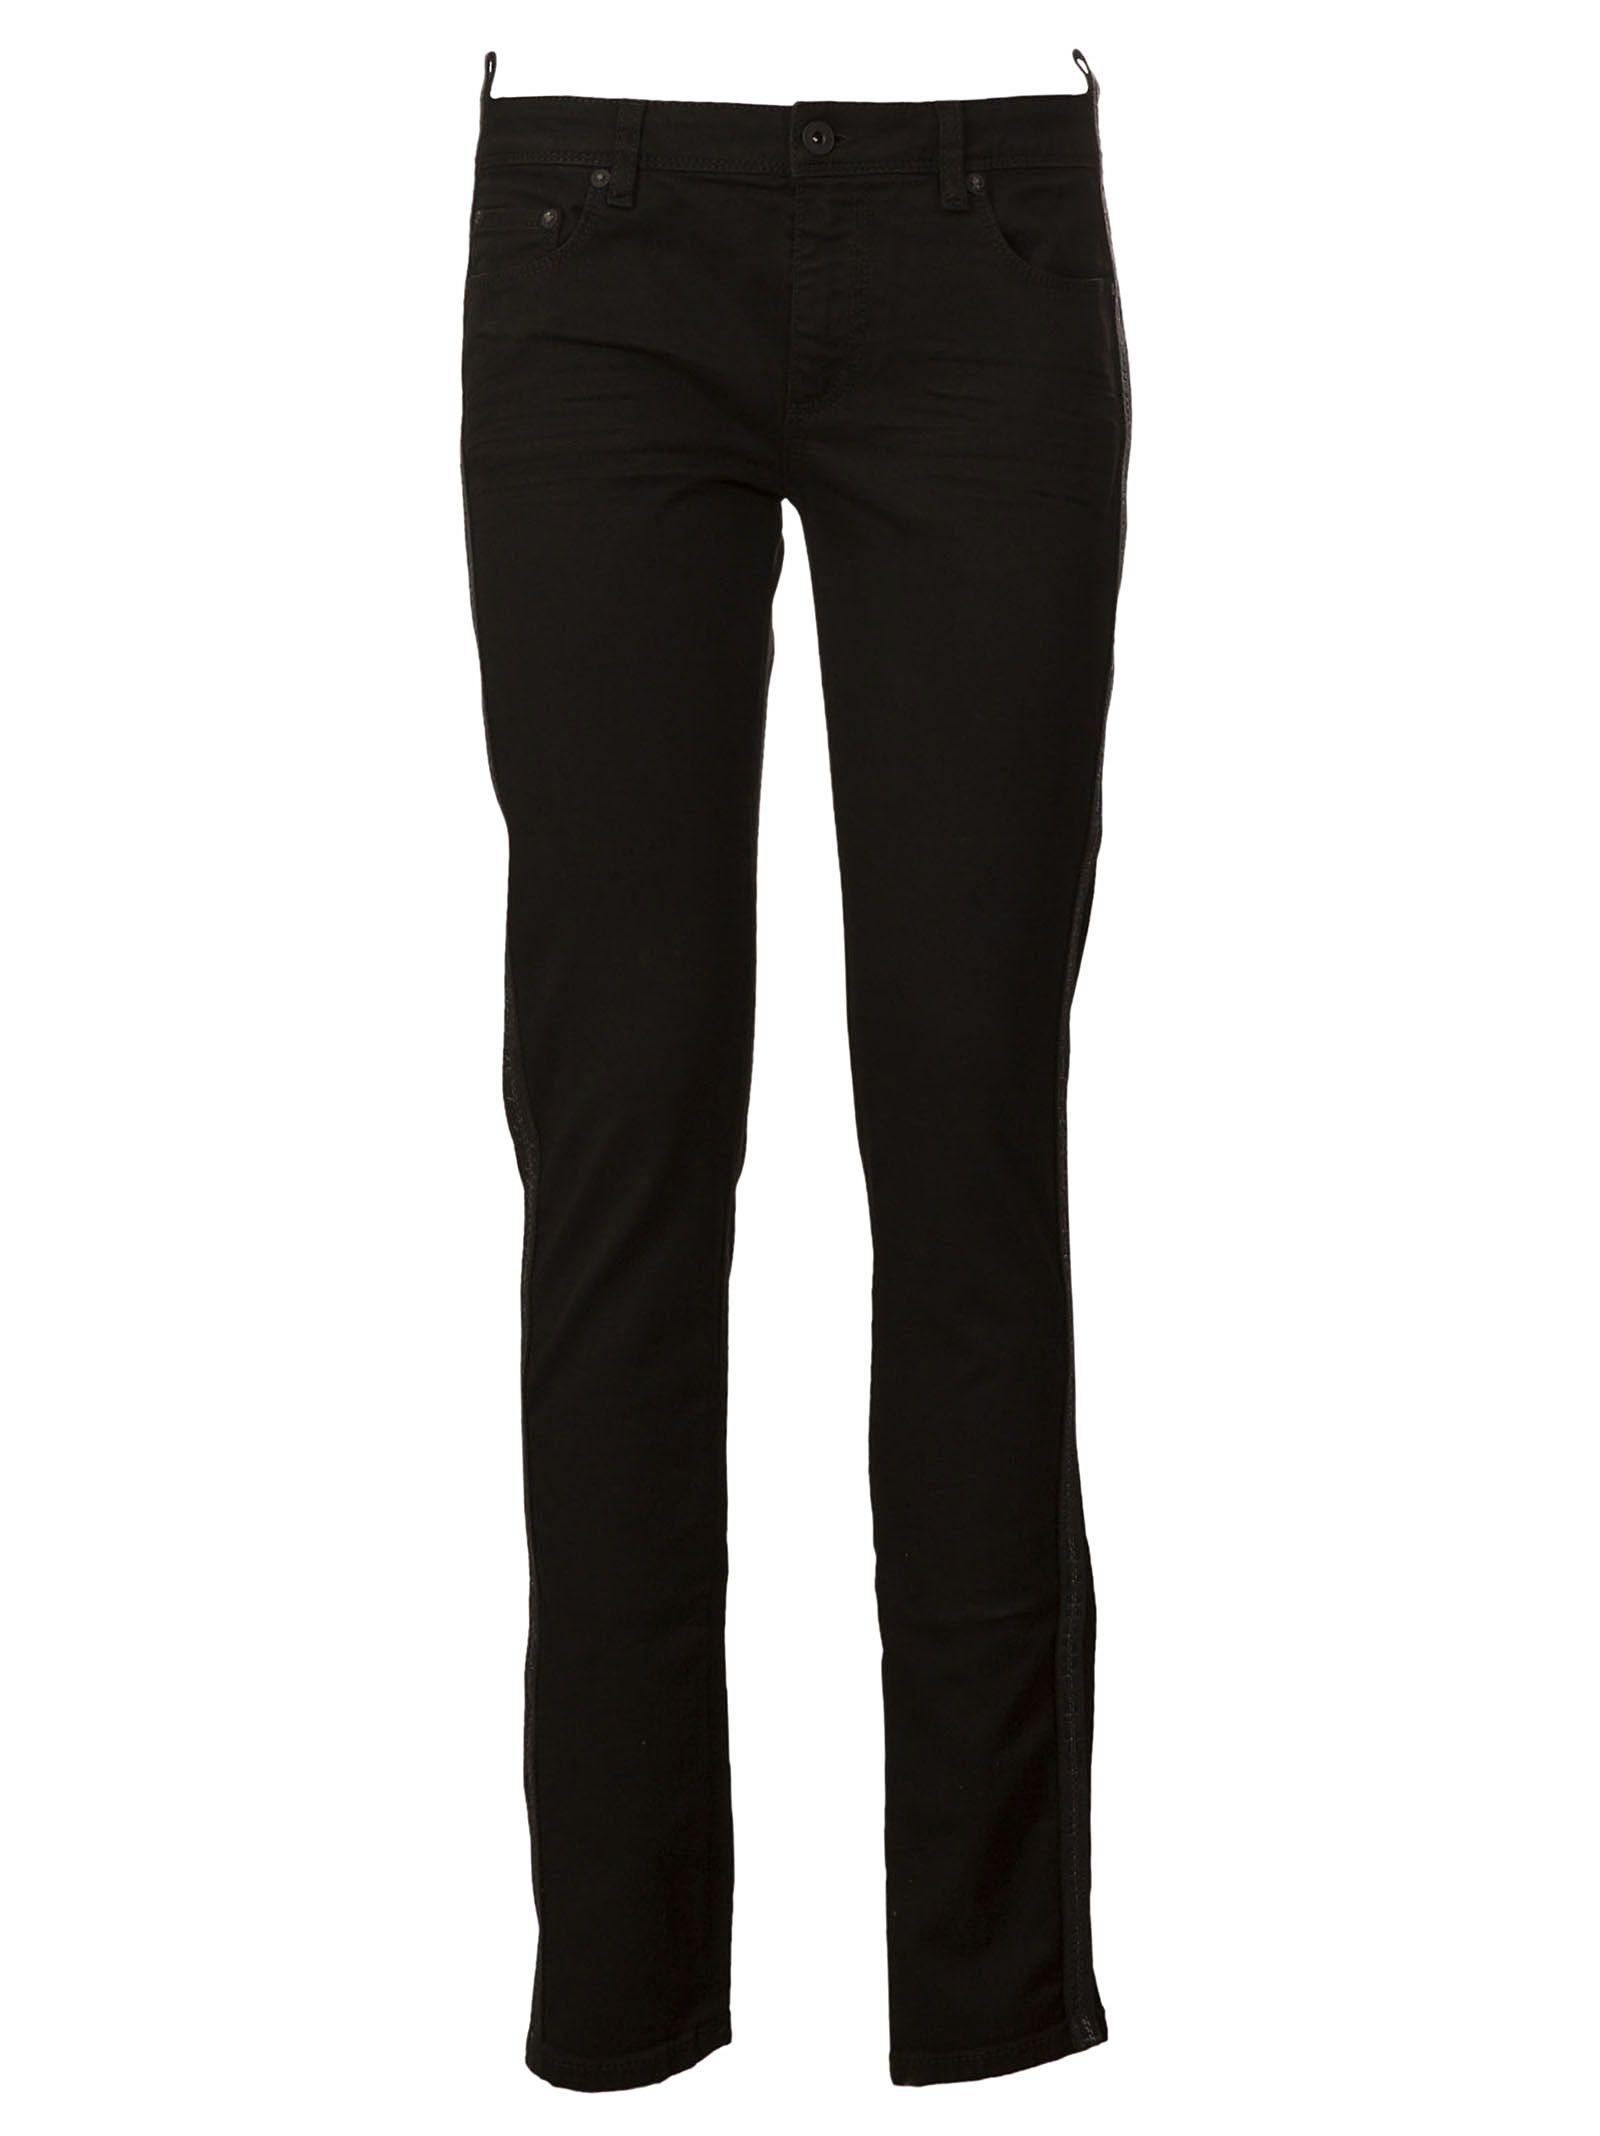 OFF-WHITE Off White Slim-Fit Jeans in Black | ModeSens